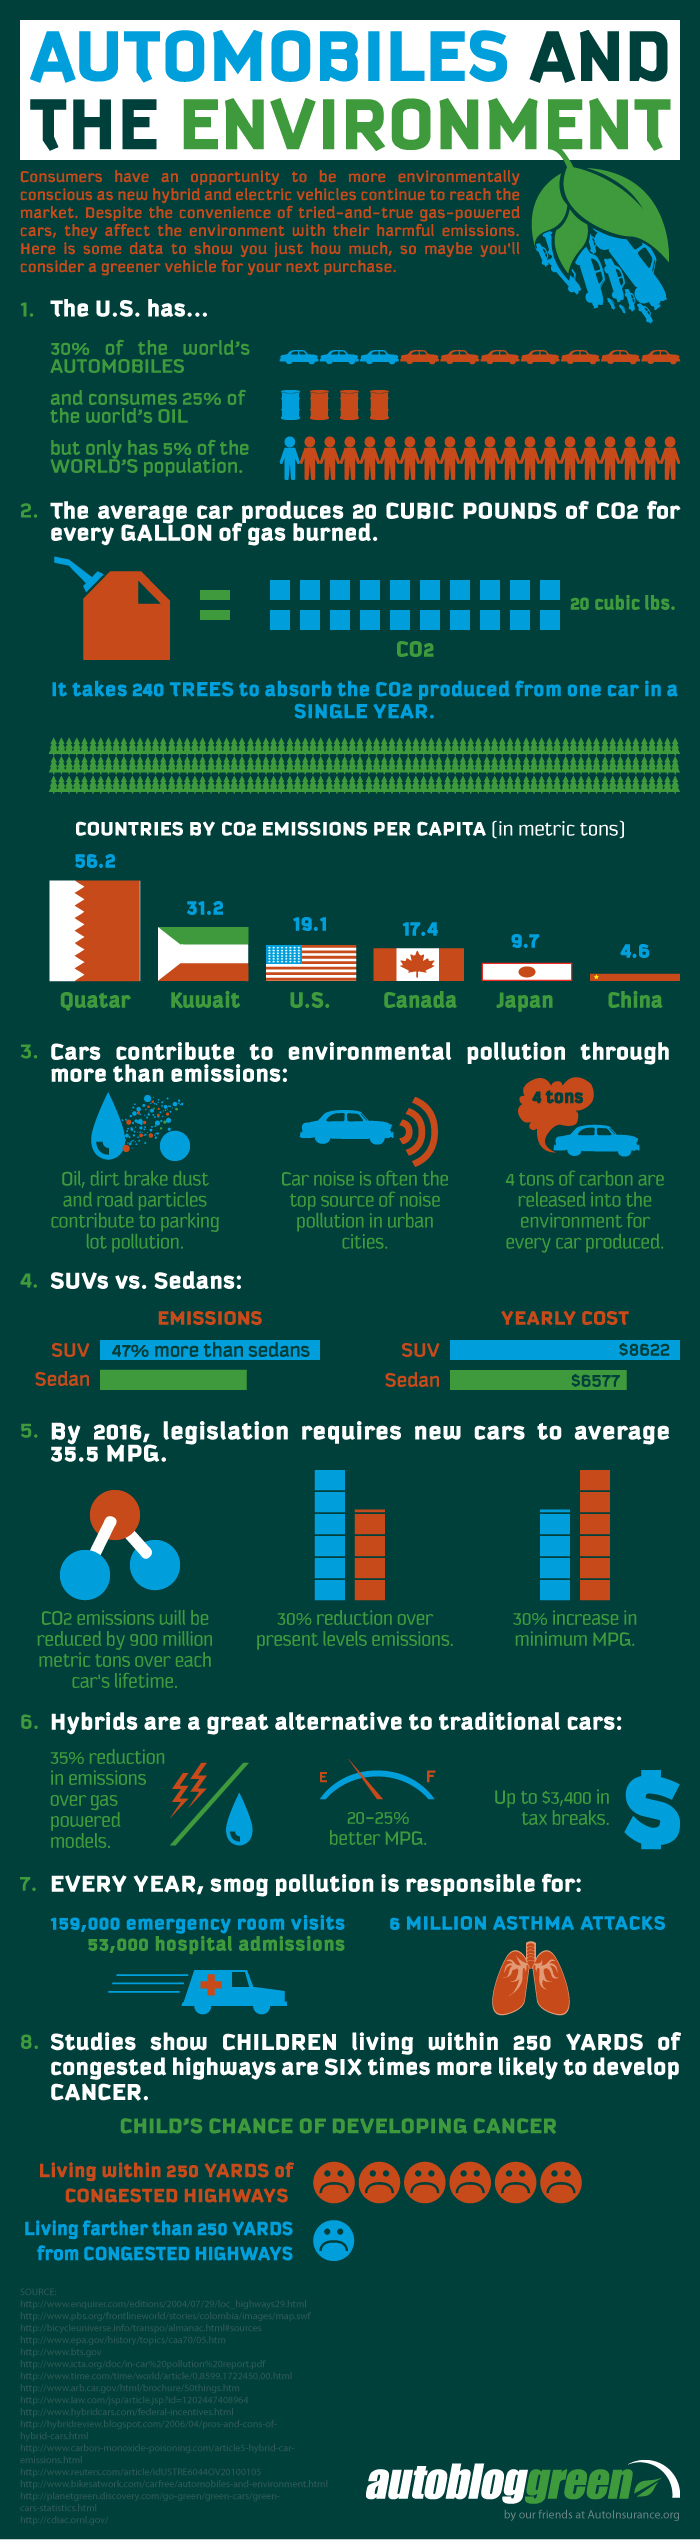 Automobiles and the Environment